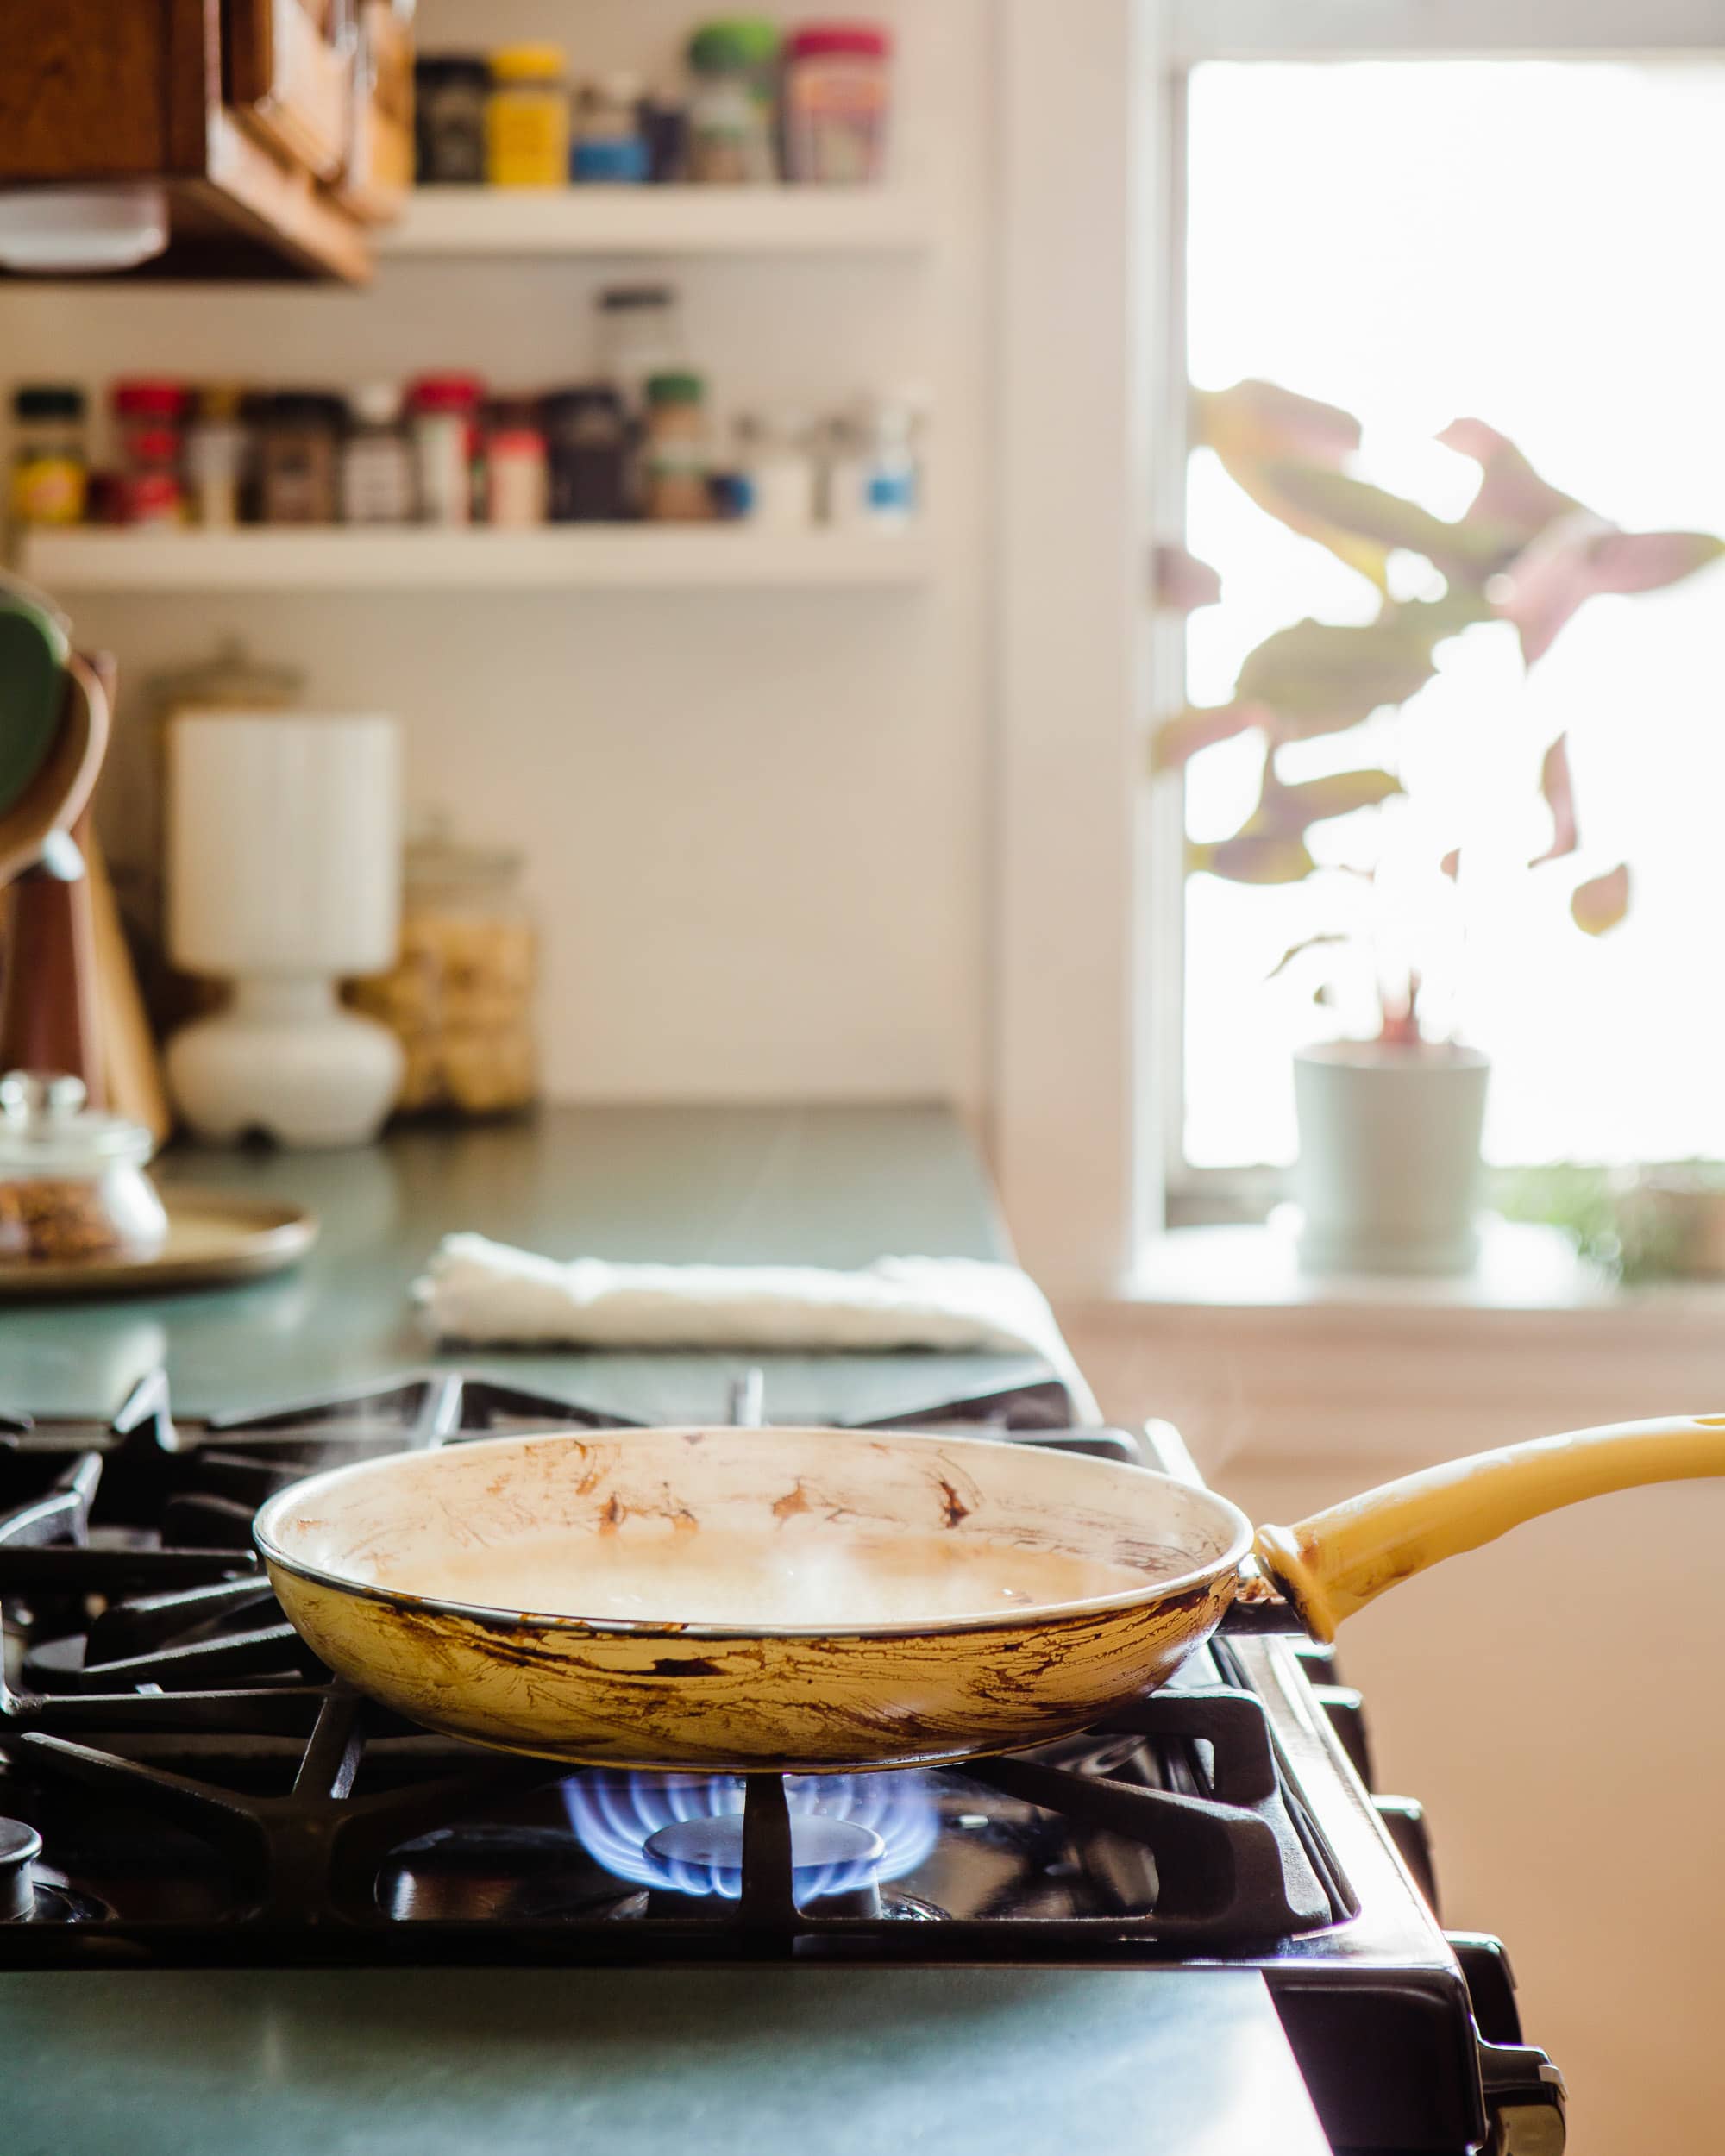 How to Clean Ceramic Pans and Cookware